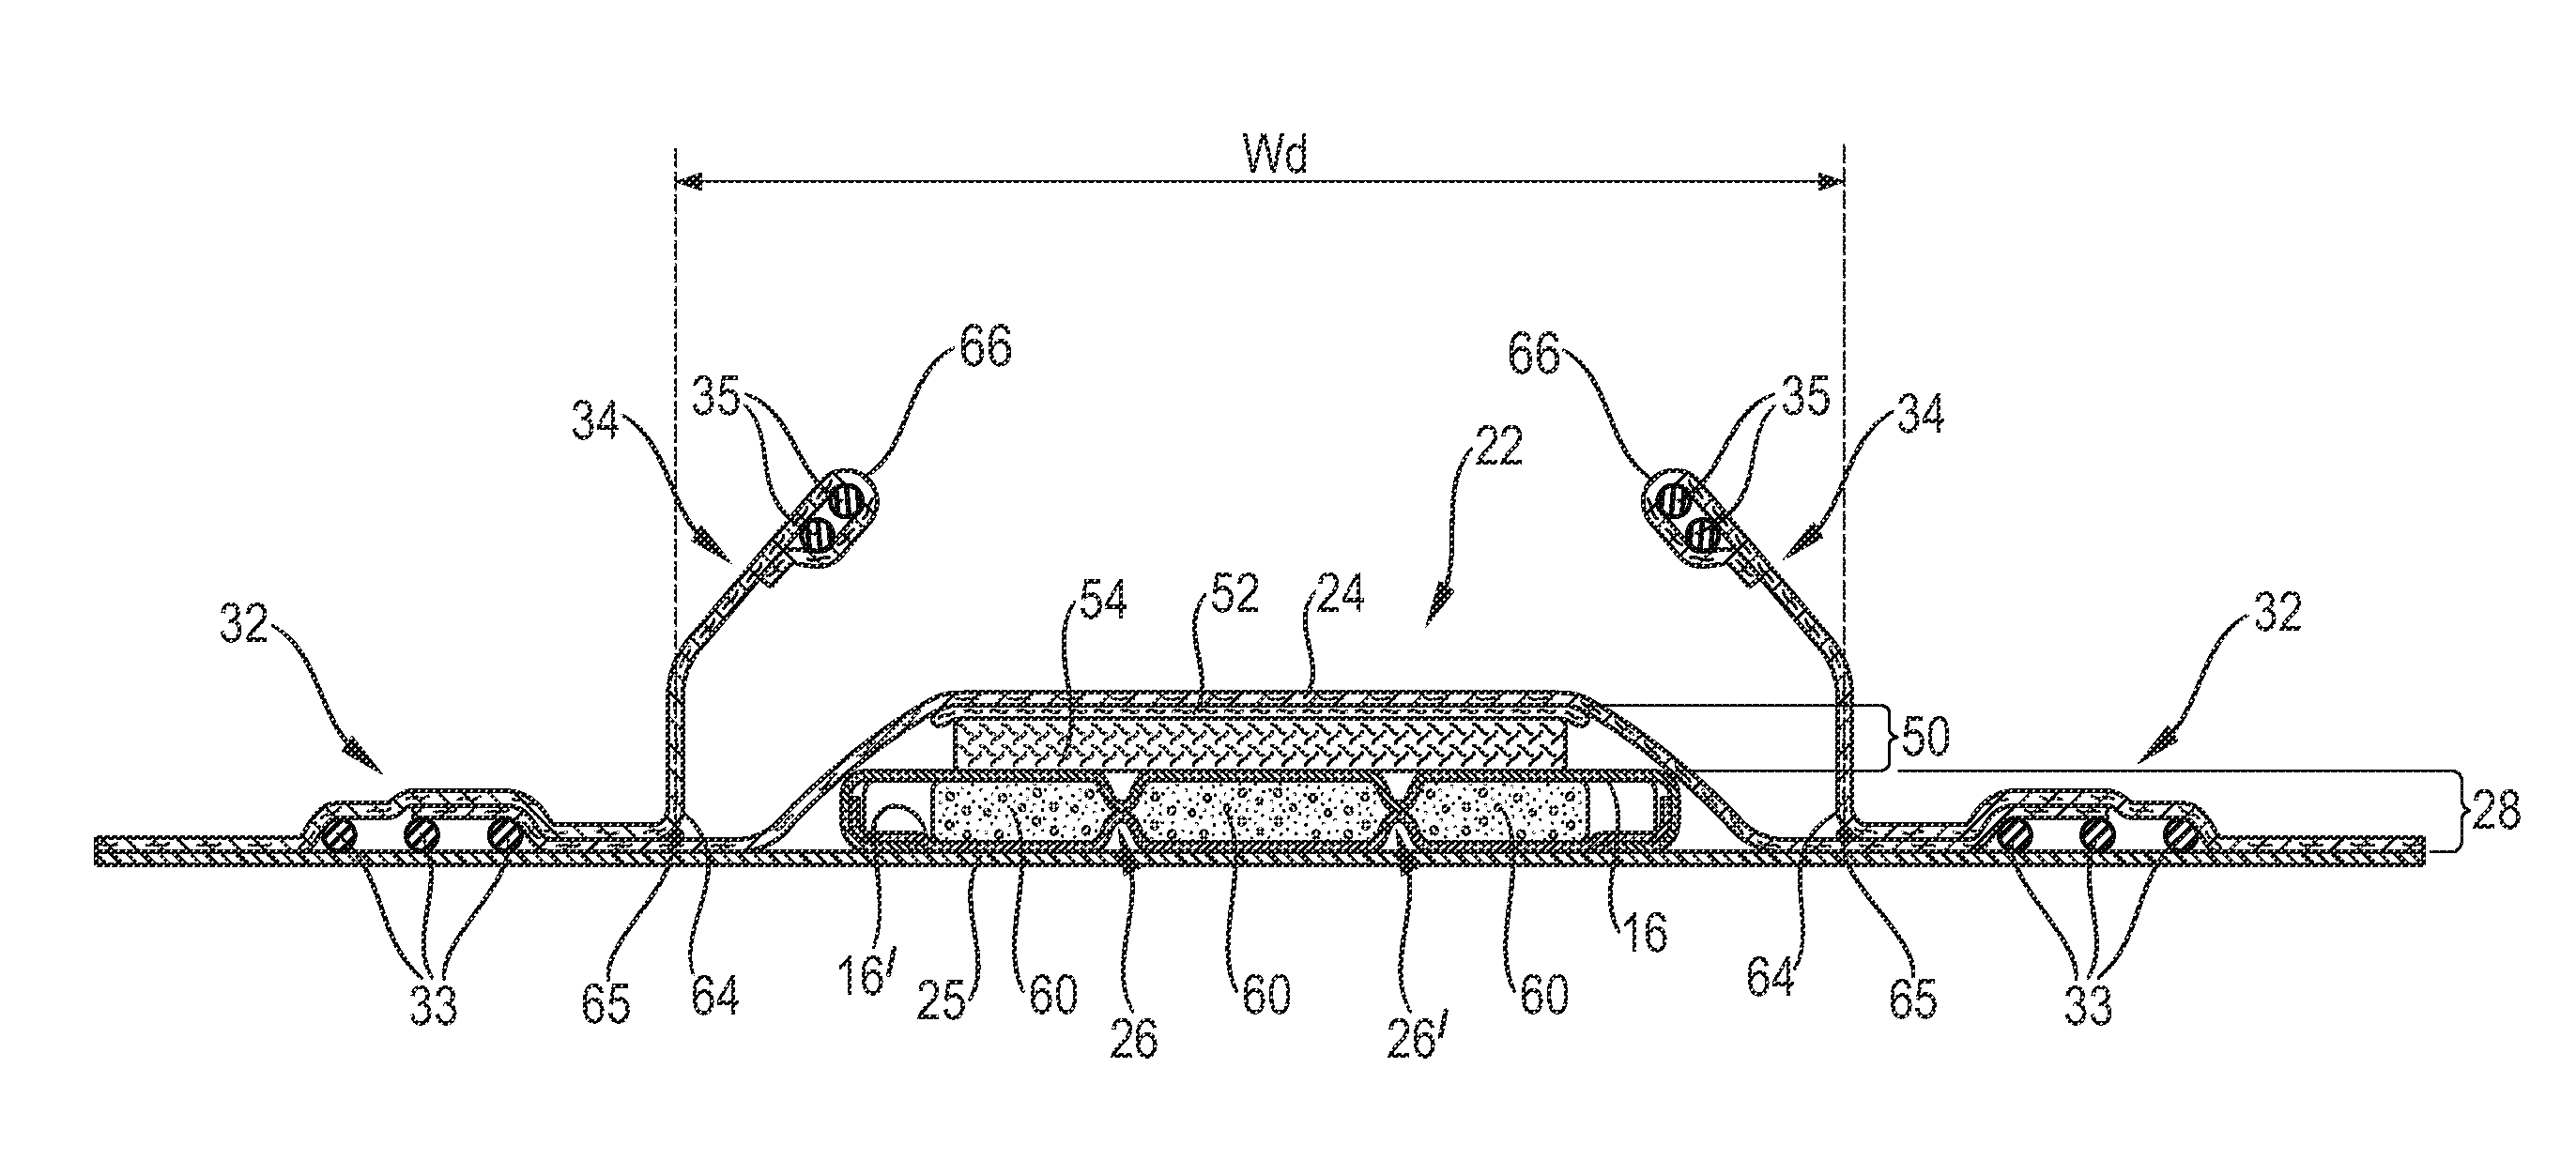 Absorbent article with high absorbent material content